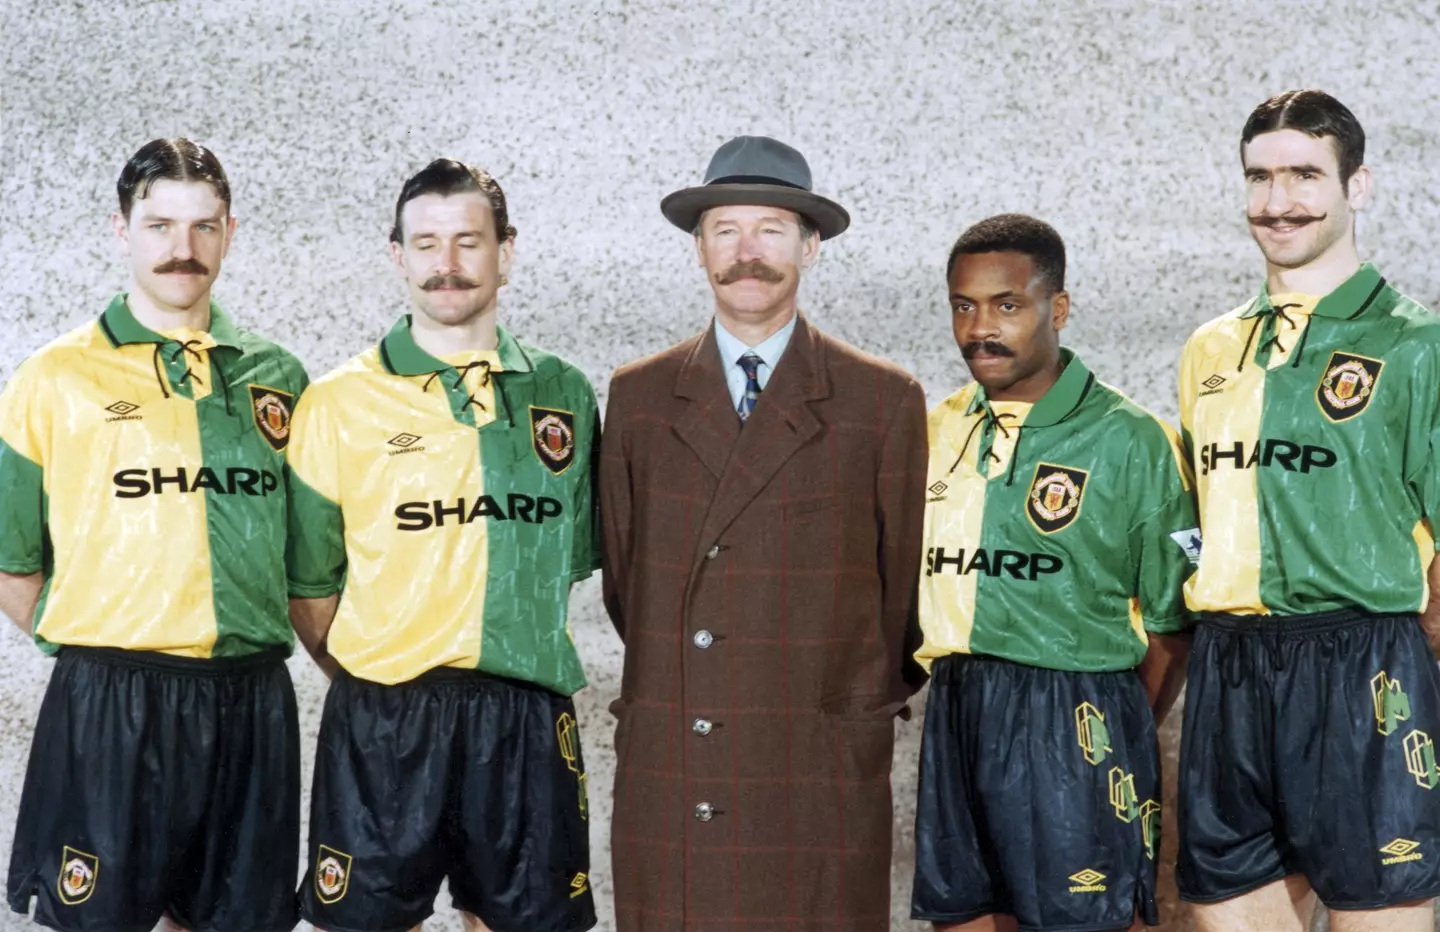 Sir Alex Ferguson alongside Lee Sharpe, Mark Hughes, Paul Parker and Eric Cantona sporting the green and gold kit while wearing fake moustaches. (Alamy)